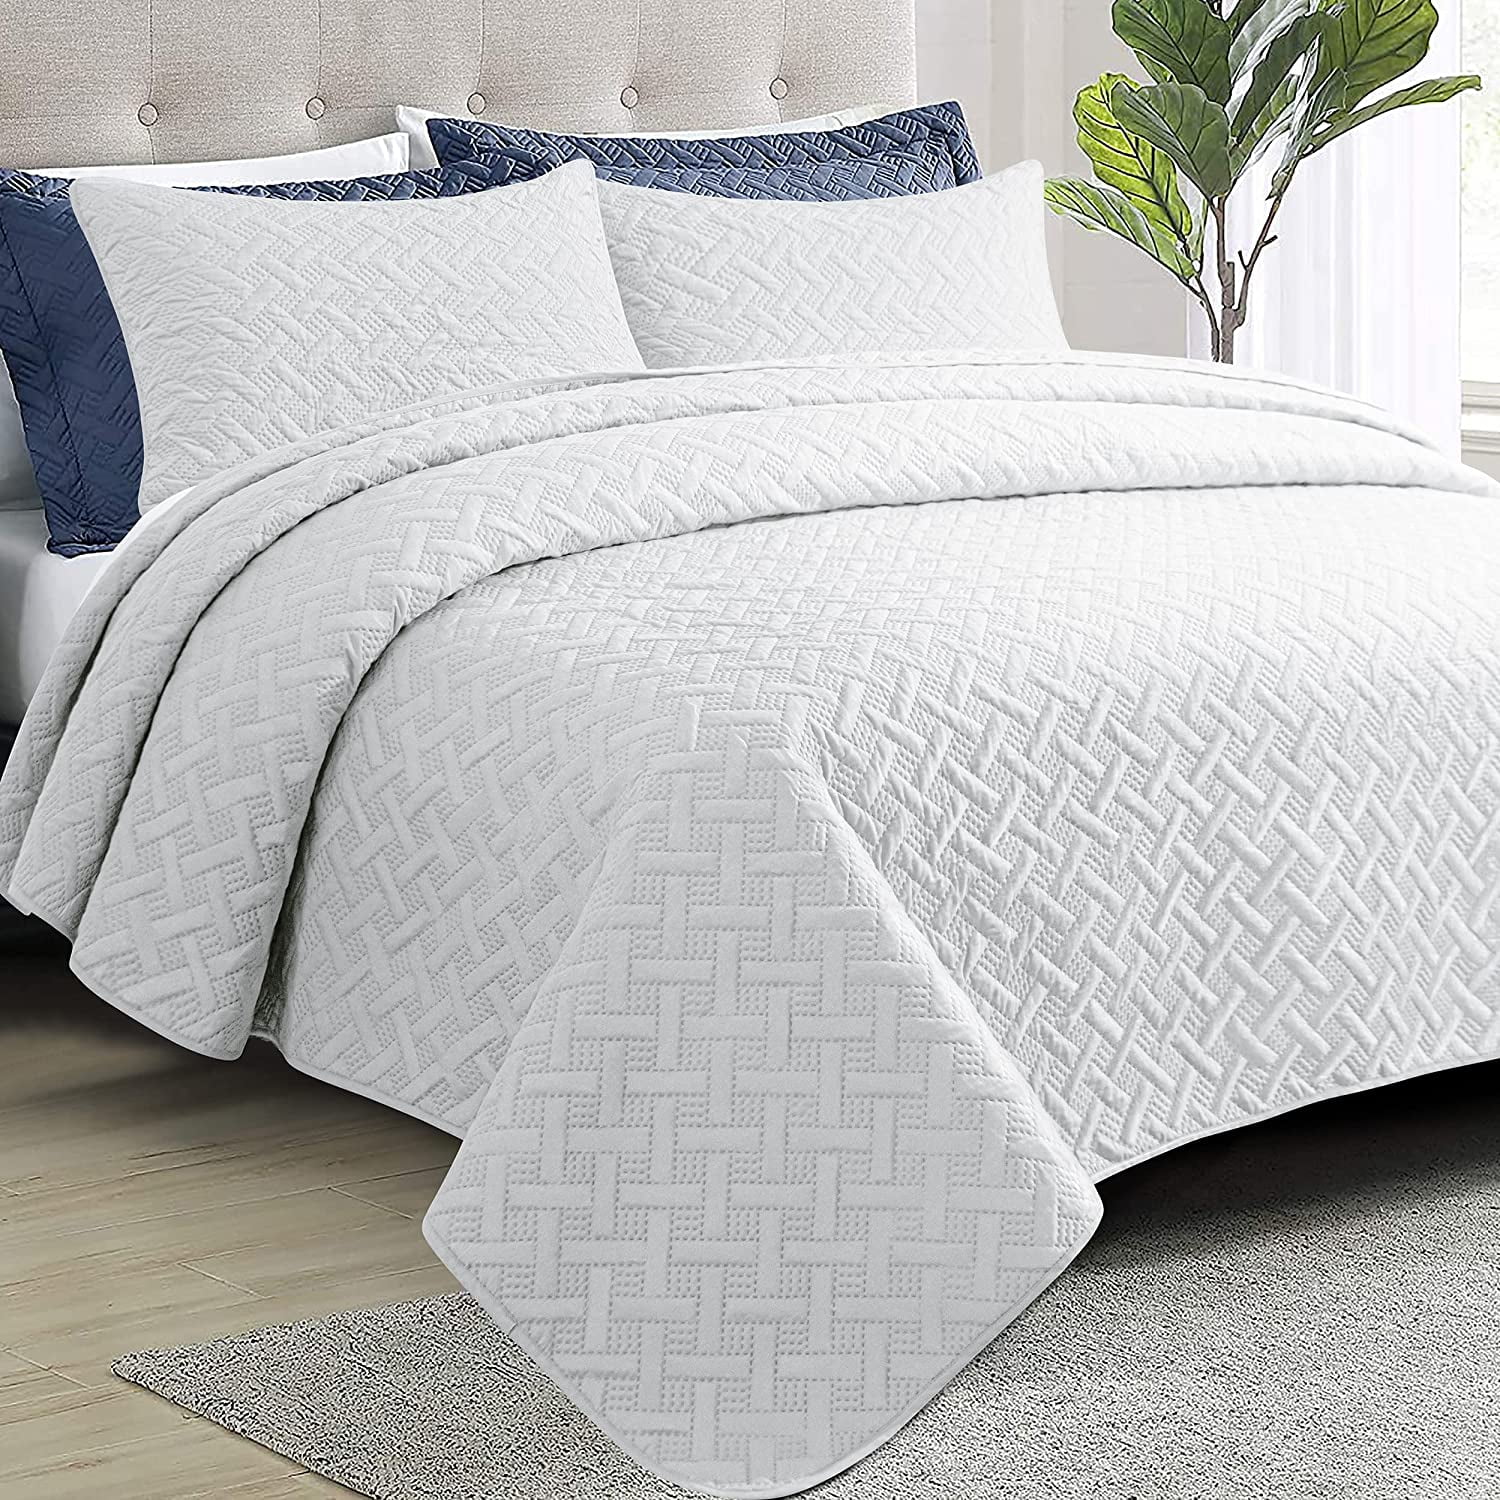 Ultrasonic Embossing Lightweight Quilt Set White, 1 Bedspread, 2 Shams Soft Microfiber Reversible Coverlet for All Seasons VEEYOO 3 Pieces Bedspread Oversized Queen